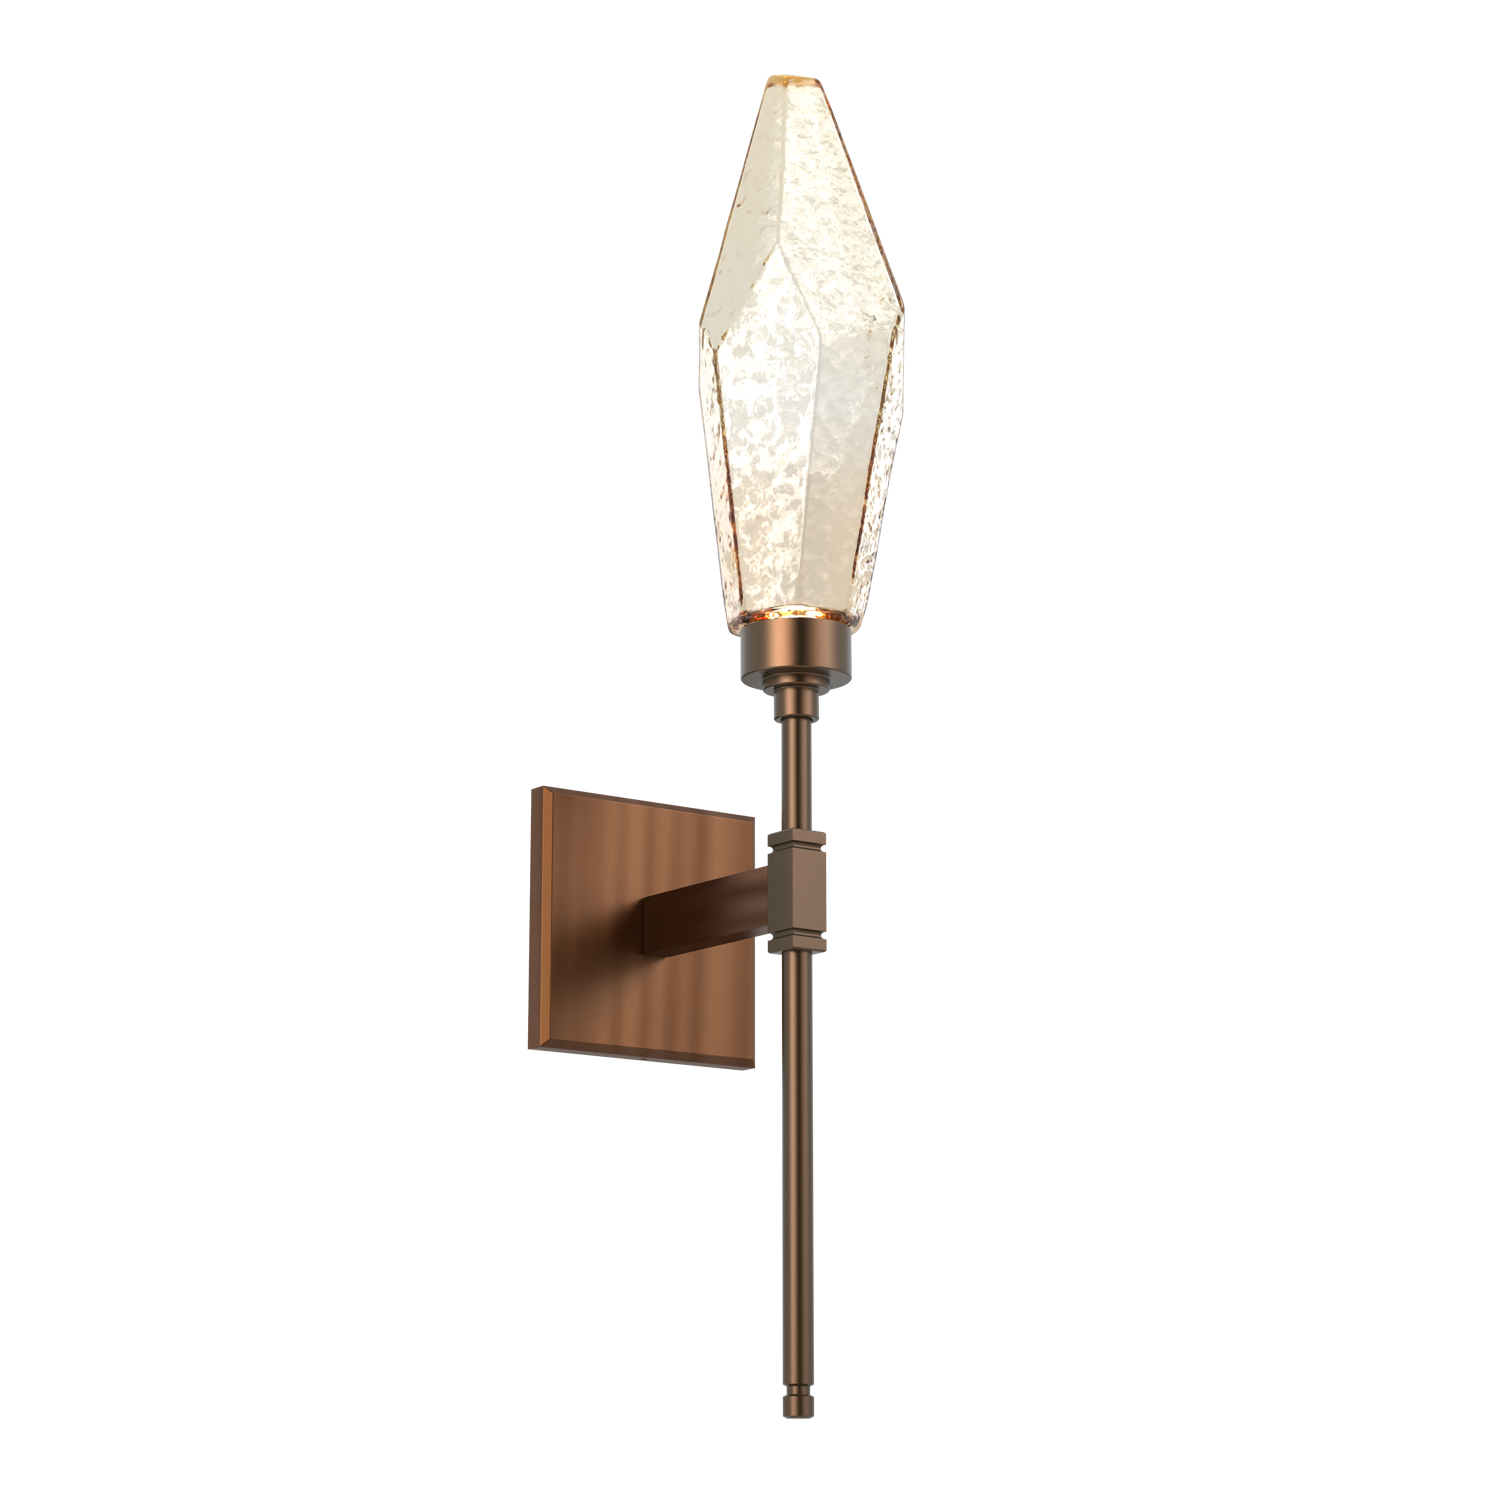 IDB0050-07-RB-CA-Hammerton-Studio-Rock-Crystal-belvedere-wall-sconce-with-oil-rubbed-bronze-finish-and-chilled-amber-blown-glass-shades-and-LED-lamping